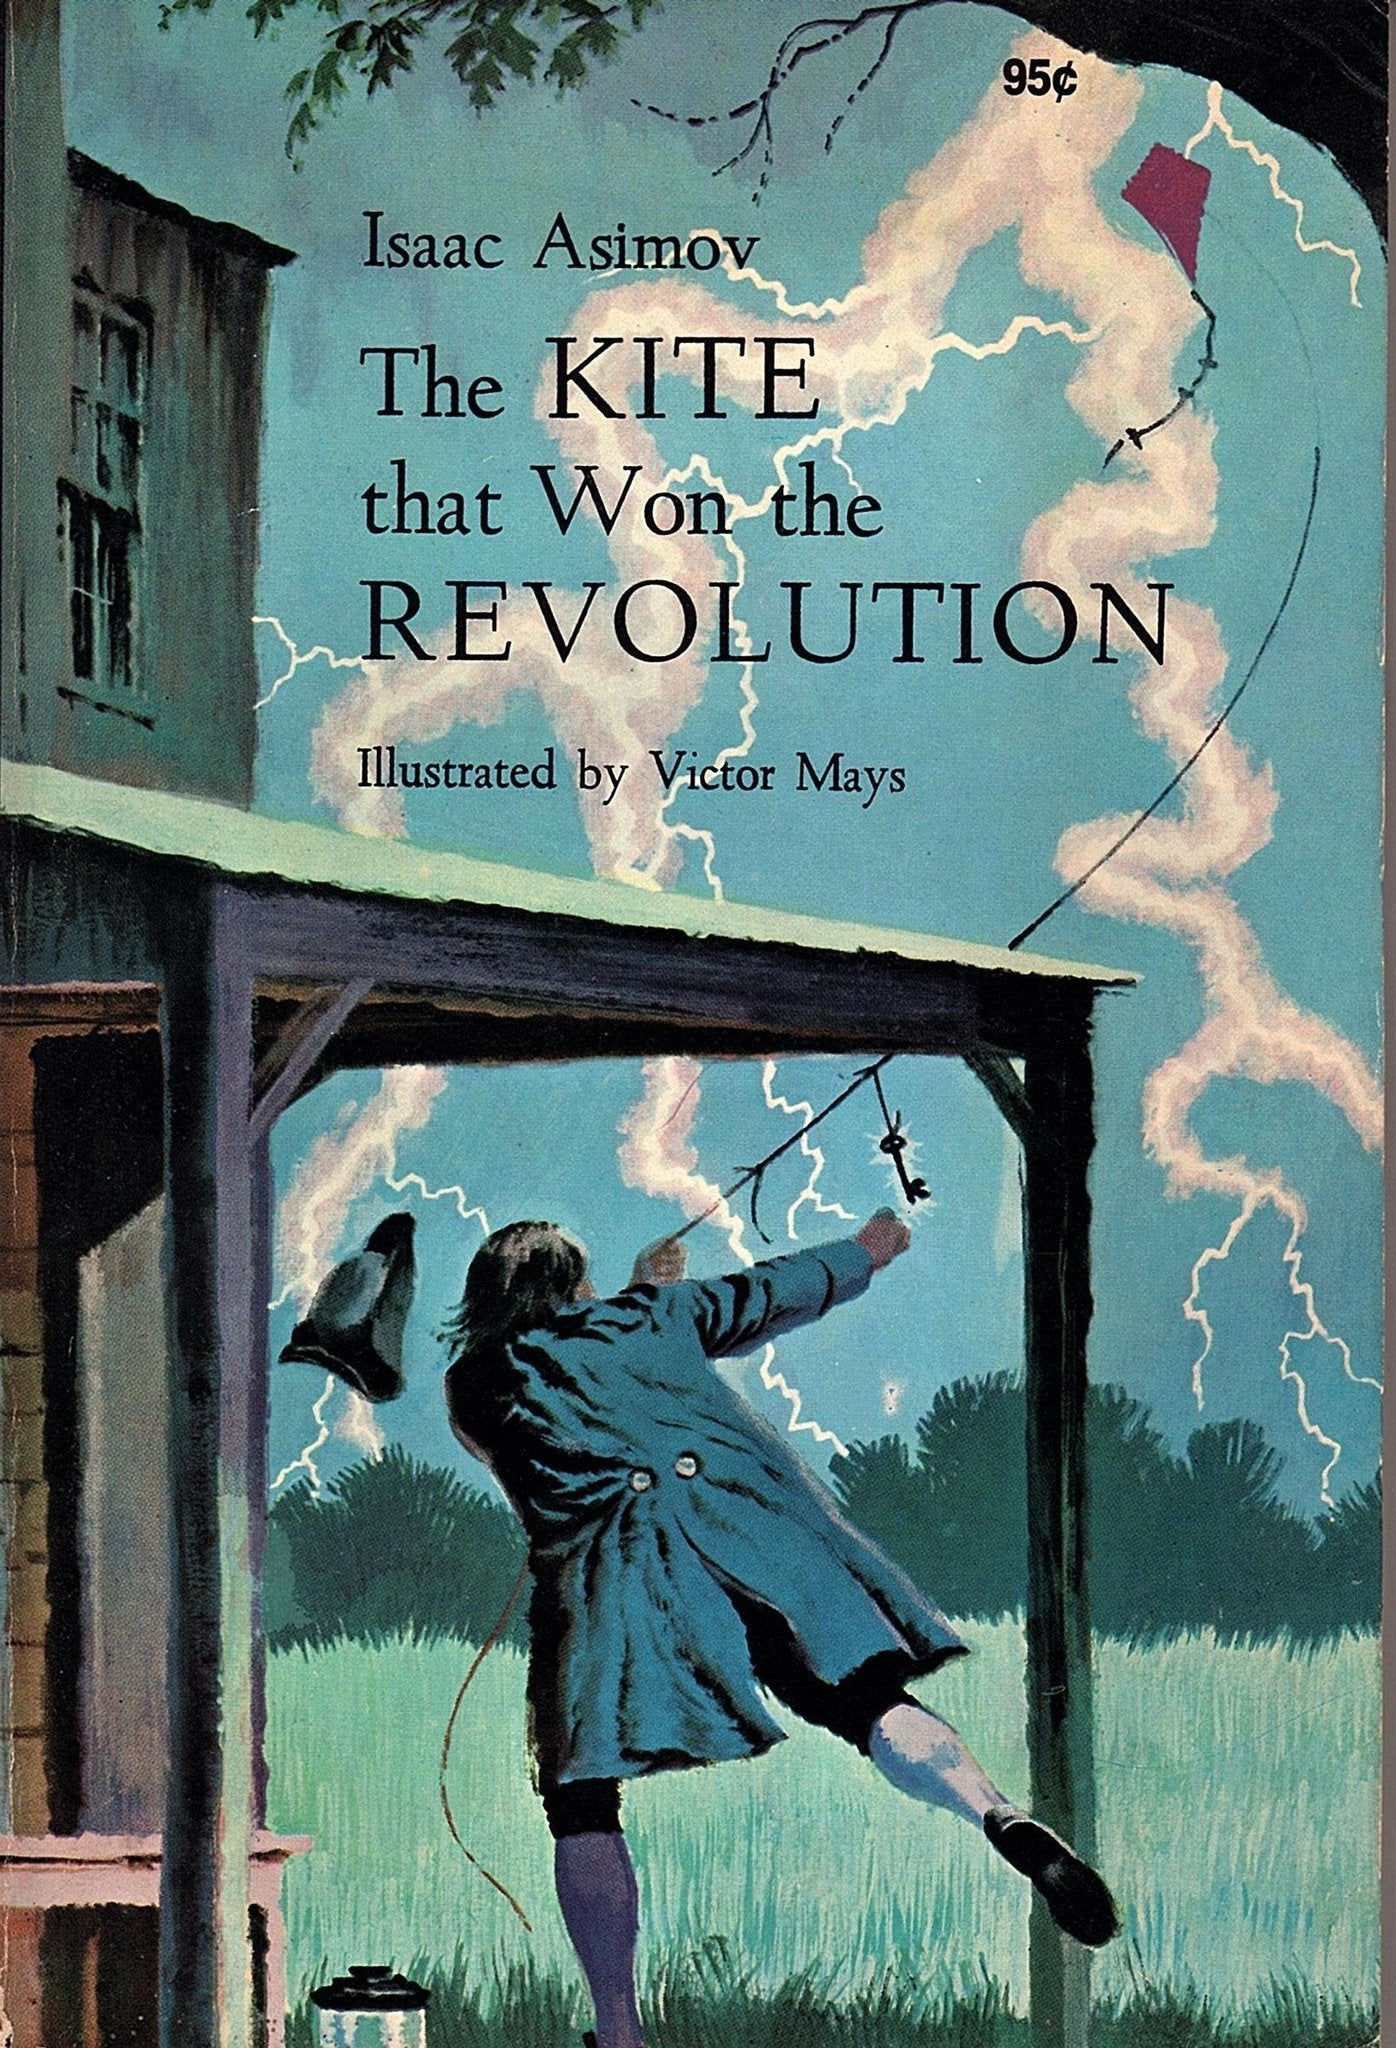 The Kite that Won the Revolution by Isaac Asimov (Rare)